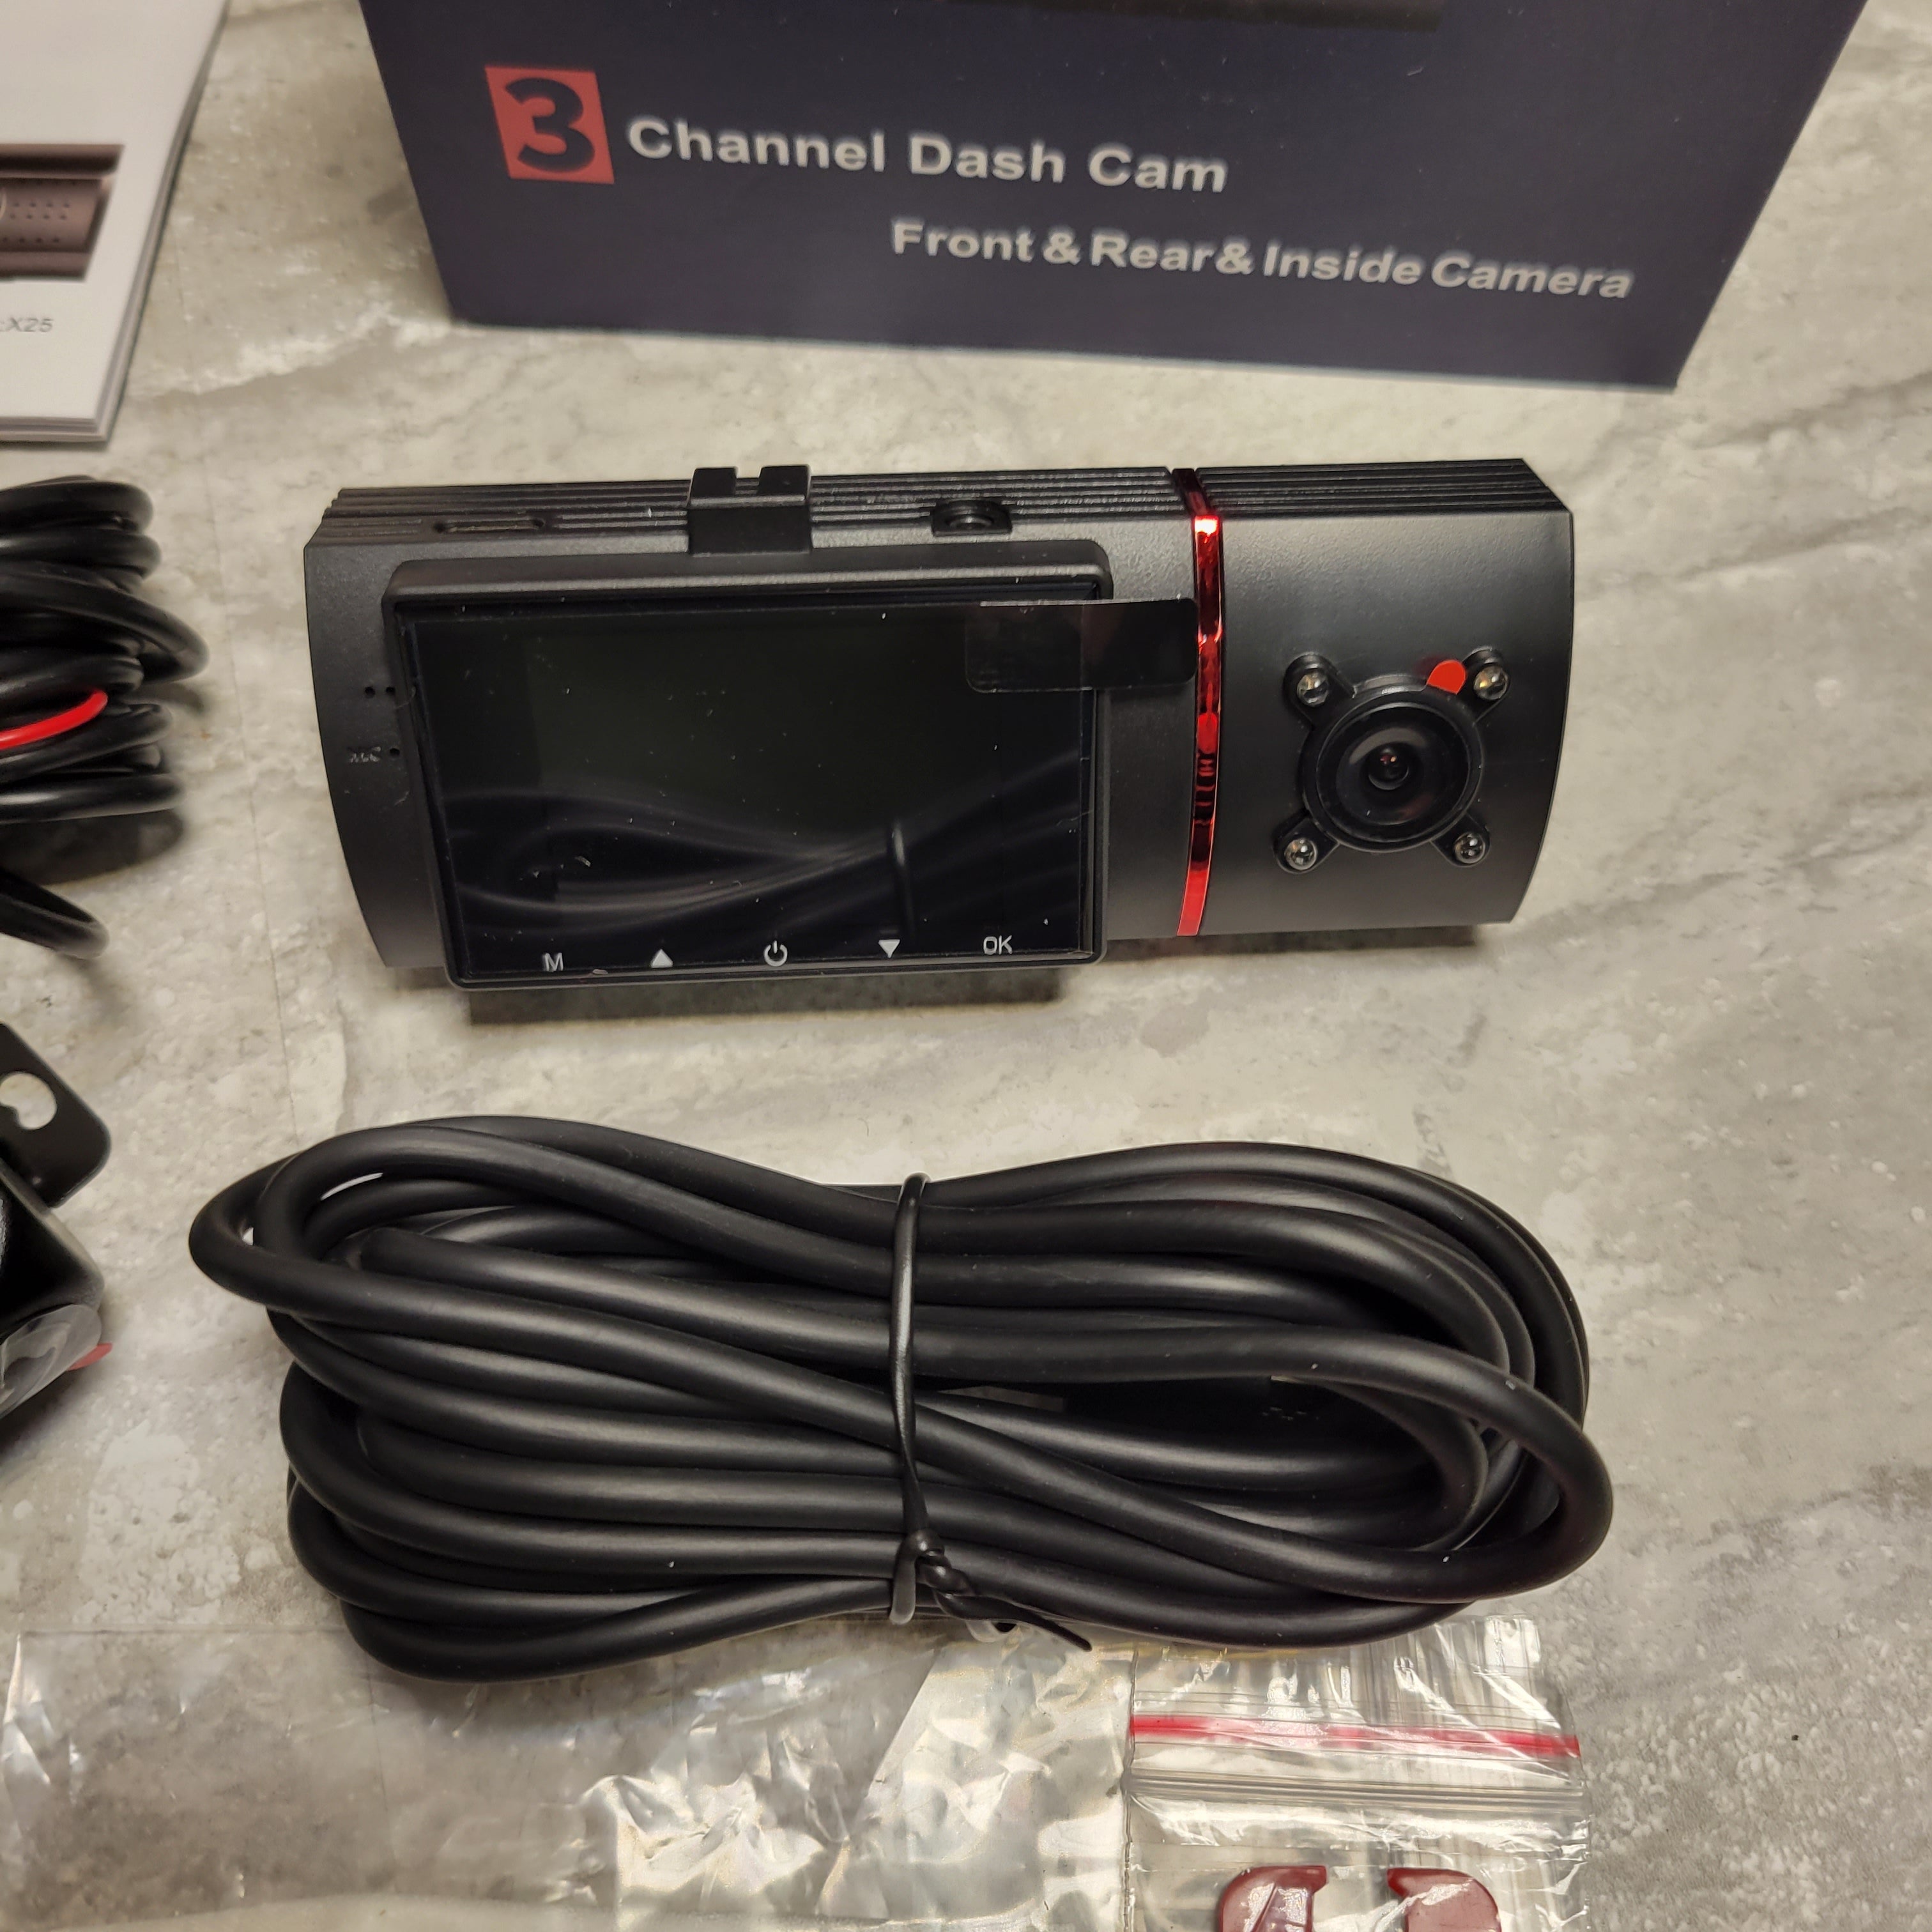 Milerong 3 Channel Dash Cam HD X25, Front, Rear, & Inside (8045146243310)